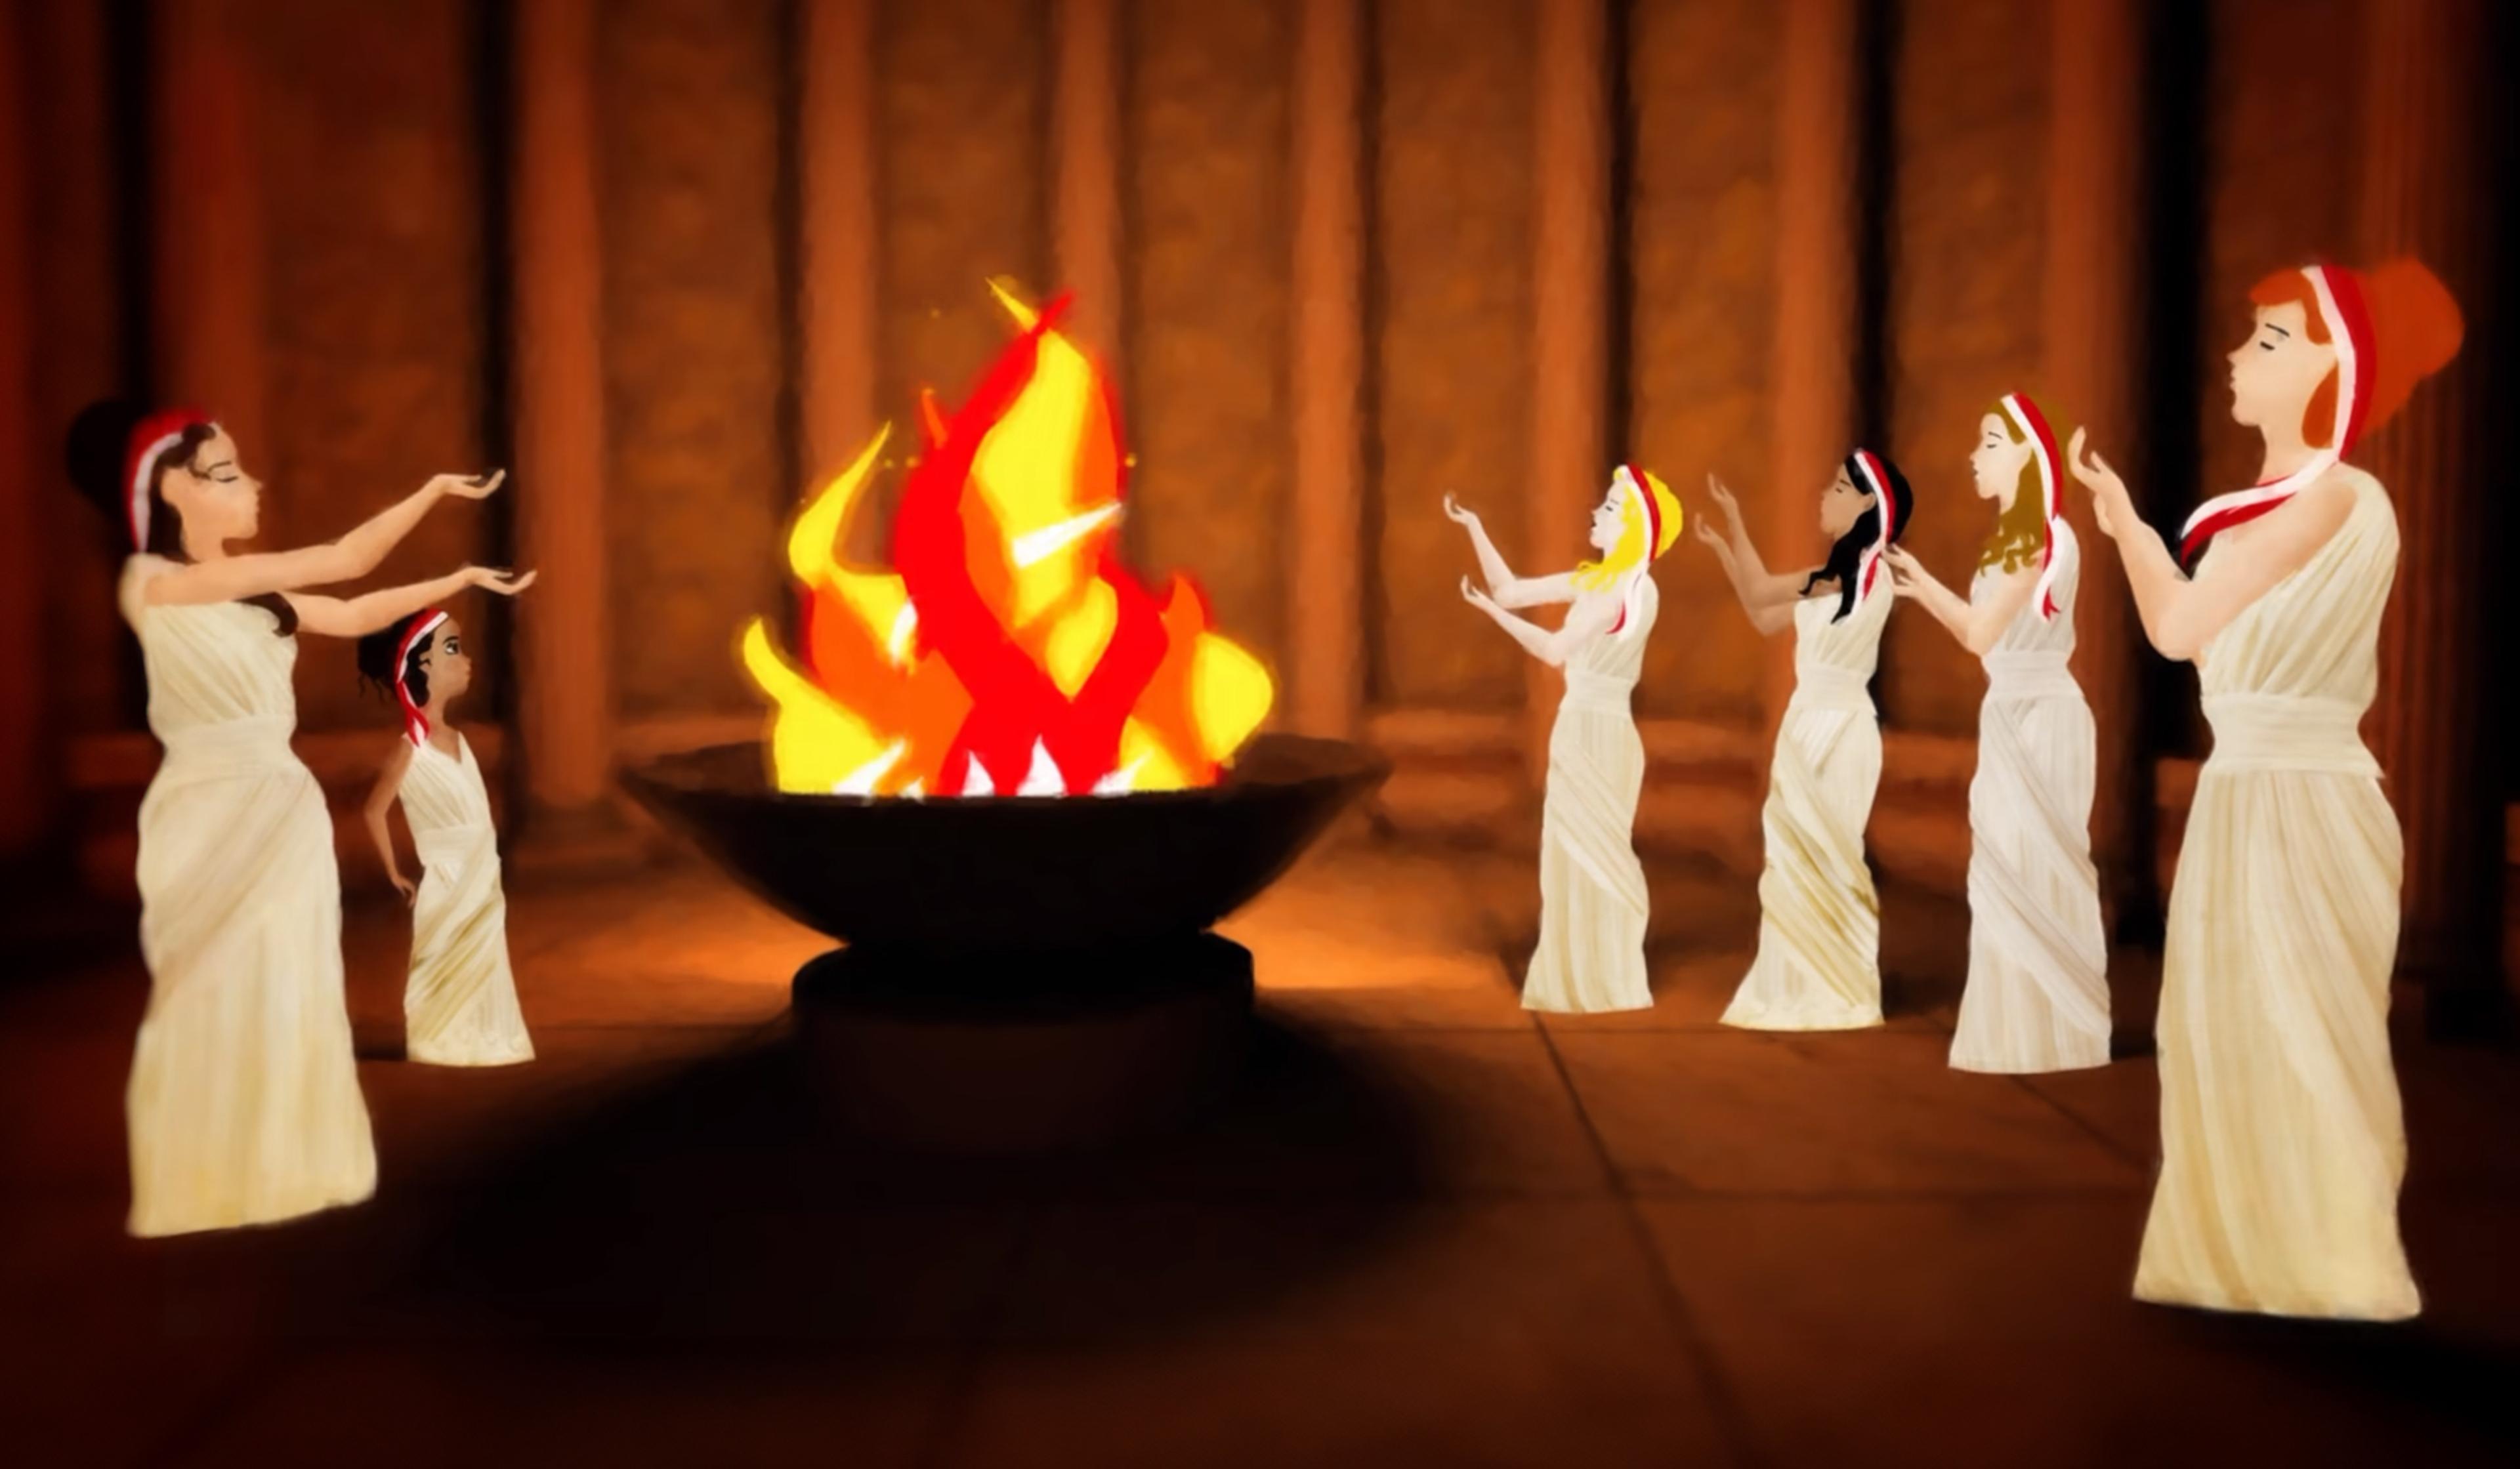 Illustration of a group of women dressed in ancient Greek-style white robes and red headbands, standing and raising their arms towards a large flaming brazier in a temple-like setting with columns and dim lighting.